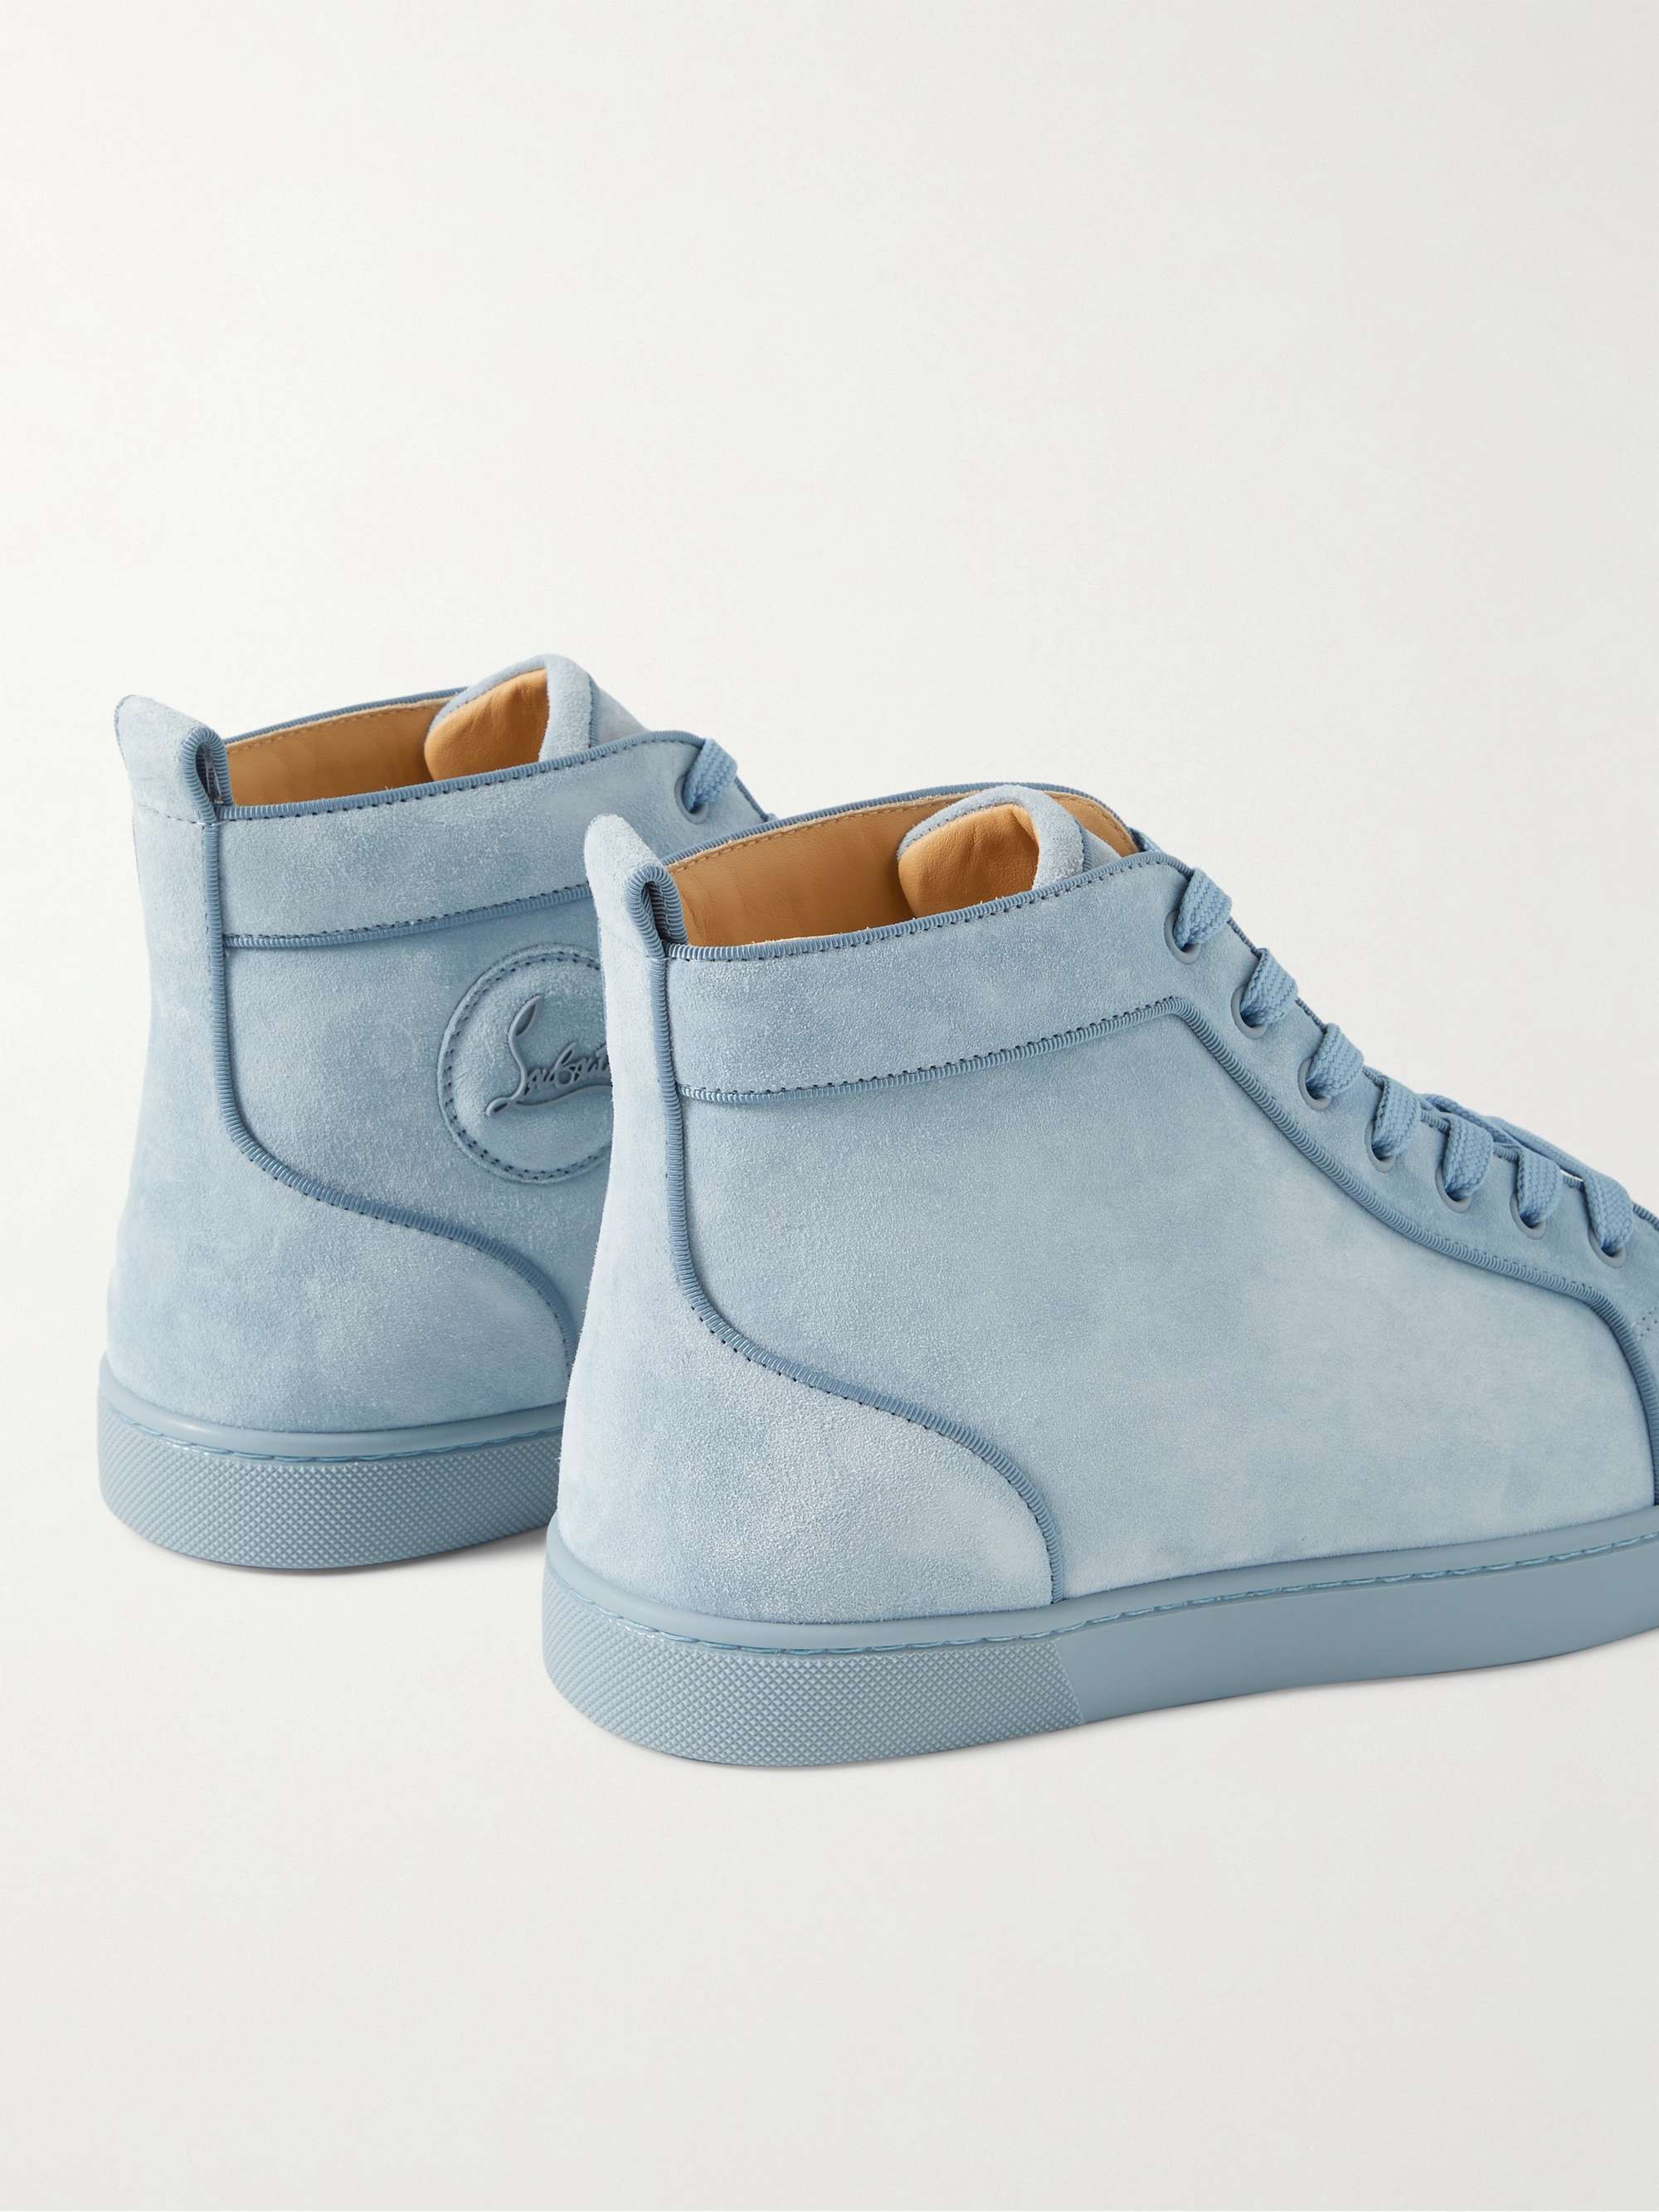 CHRISTIAN LOUBOUTIN Louis Orlato Grosgrain-Trimmed Suede High-Top Sneakers